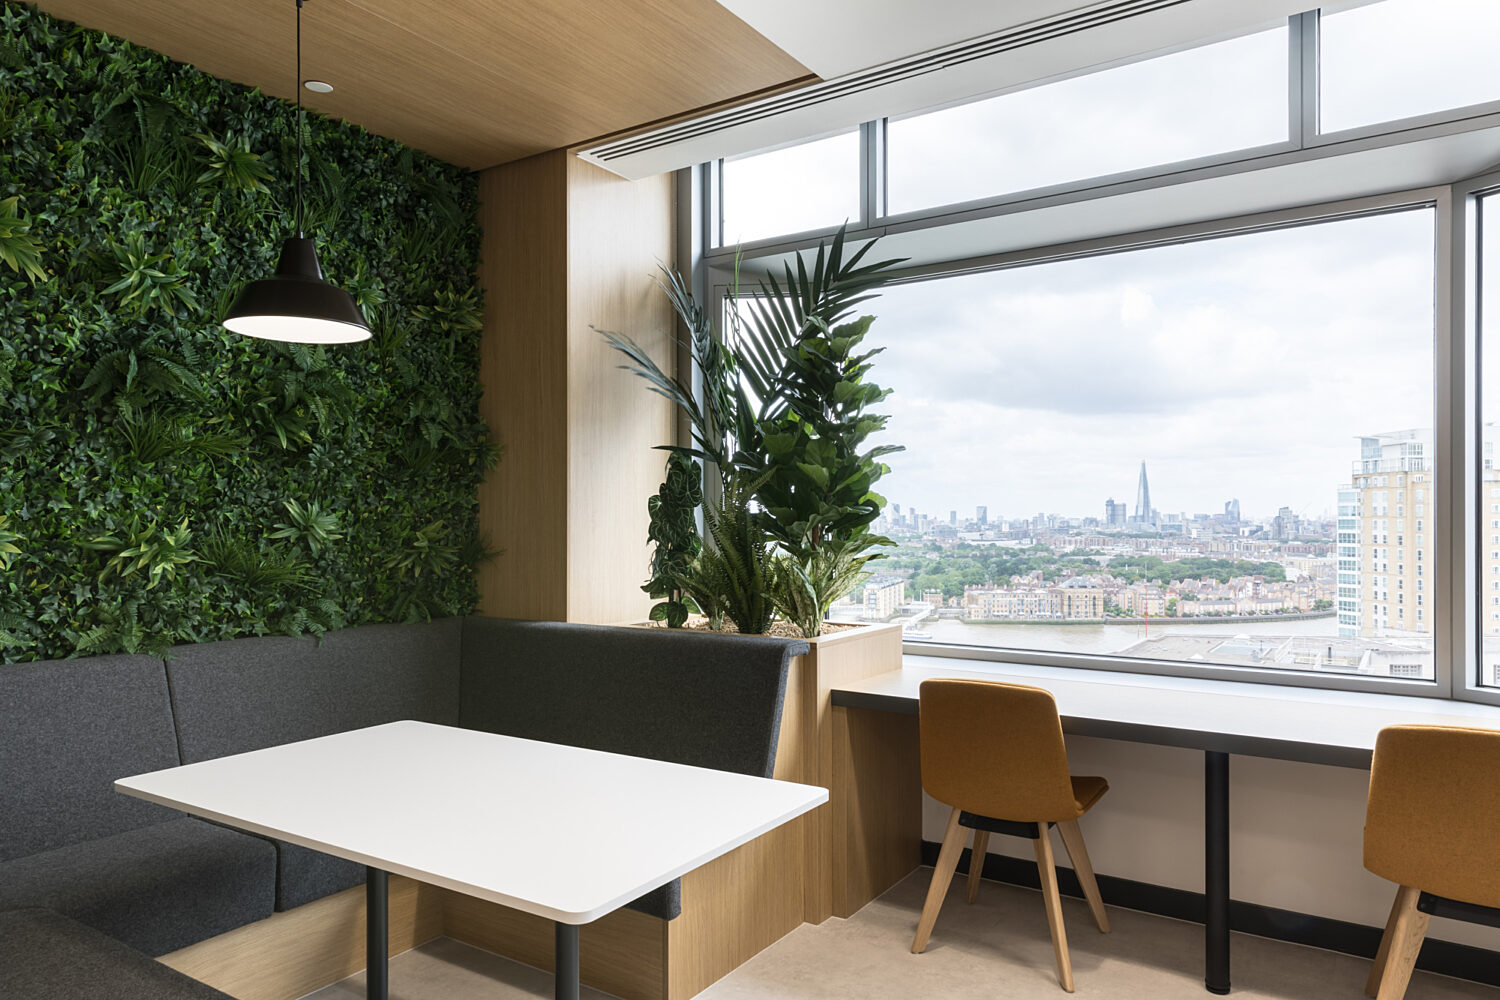 Booth seating with a view in London office